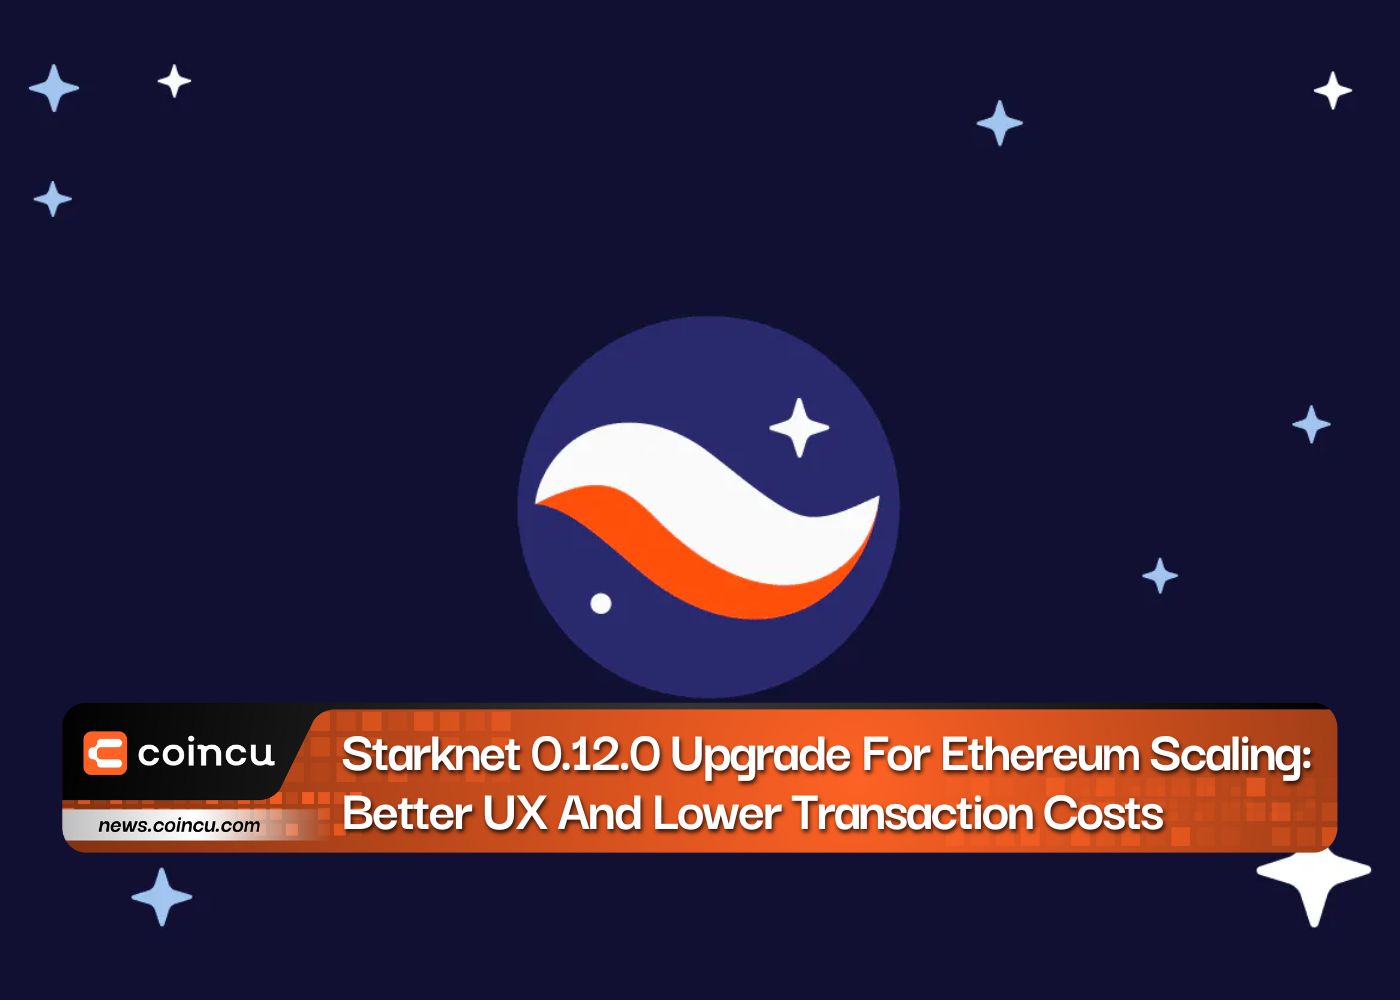 Starknet 0.12.0 Upgrade For Ethereum Scaling: Better UX And Lower Transaction Costs